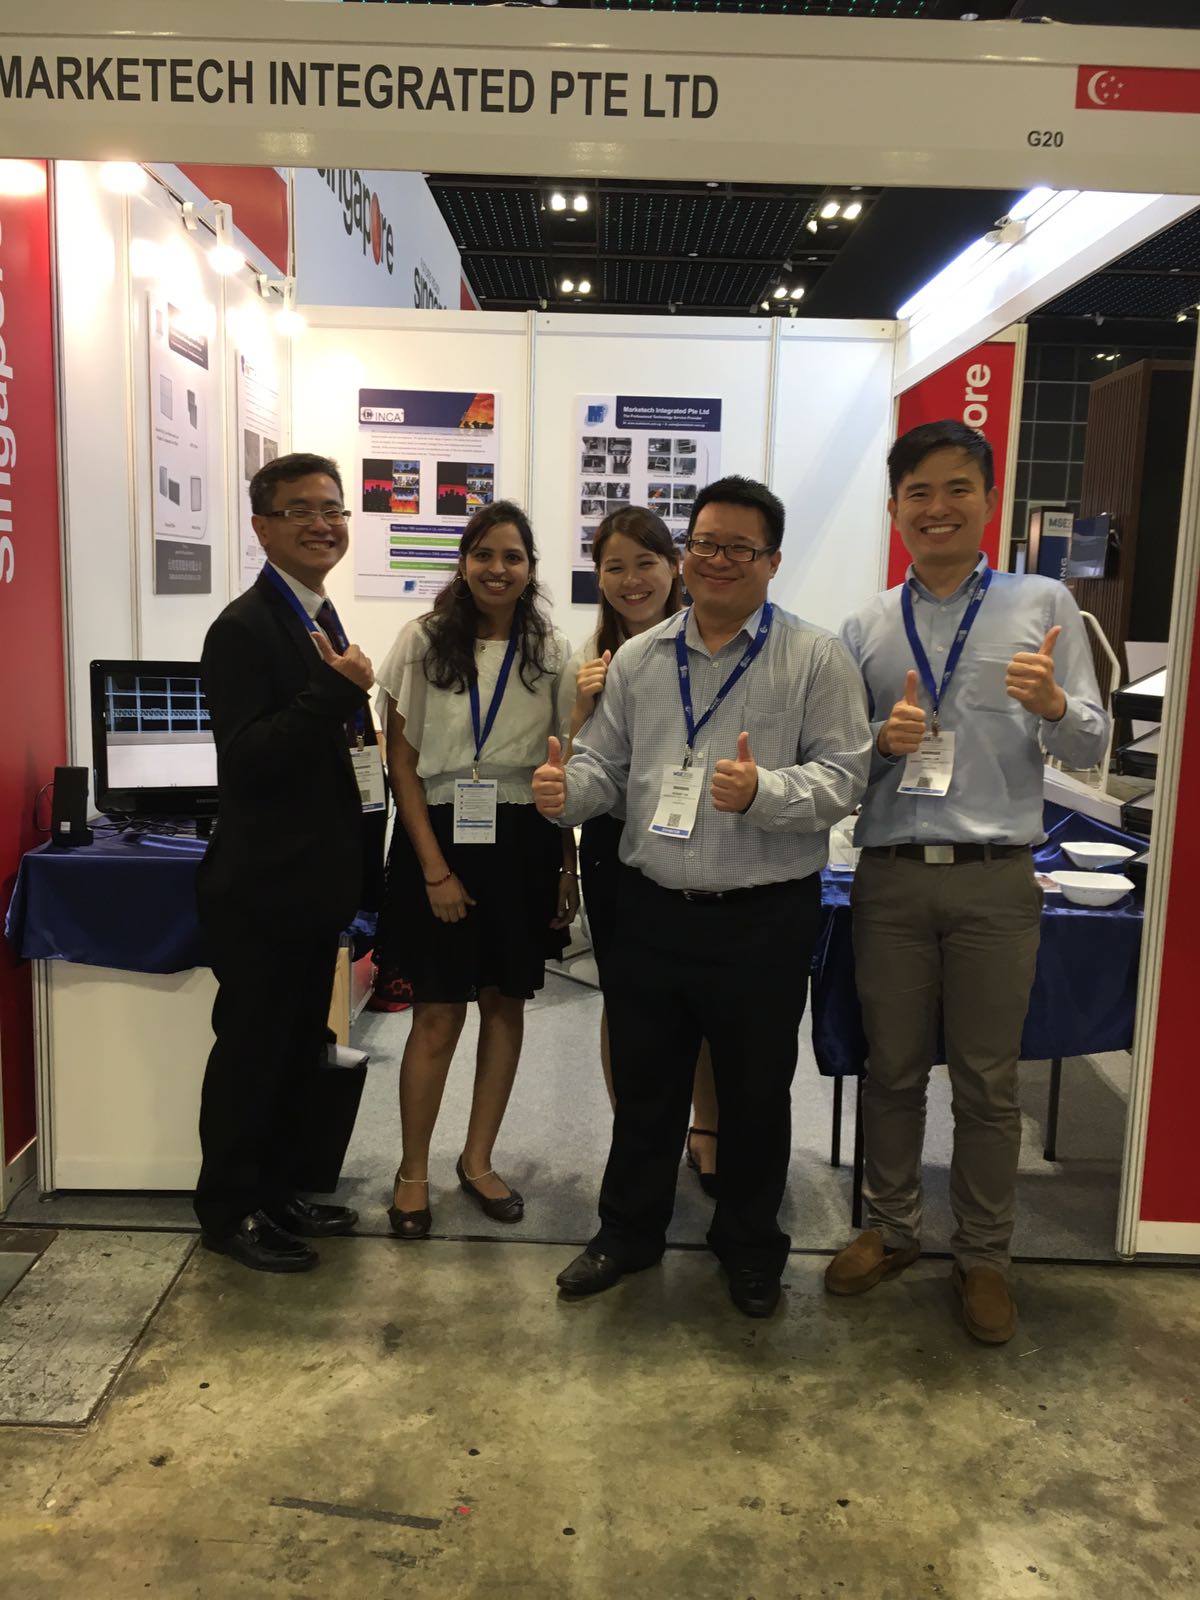 JOIN US AT MANUFACTURING SOLUTIONS EXPO (MSE 2016) AT BOOTH G20 ON 12-14 OCT 2016, SUNTEC SINGAPORE CONVENTION & EXHIBITION CENTRE